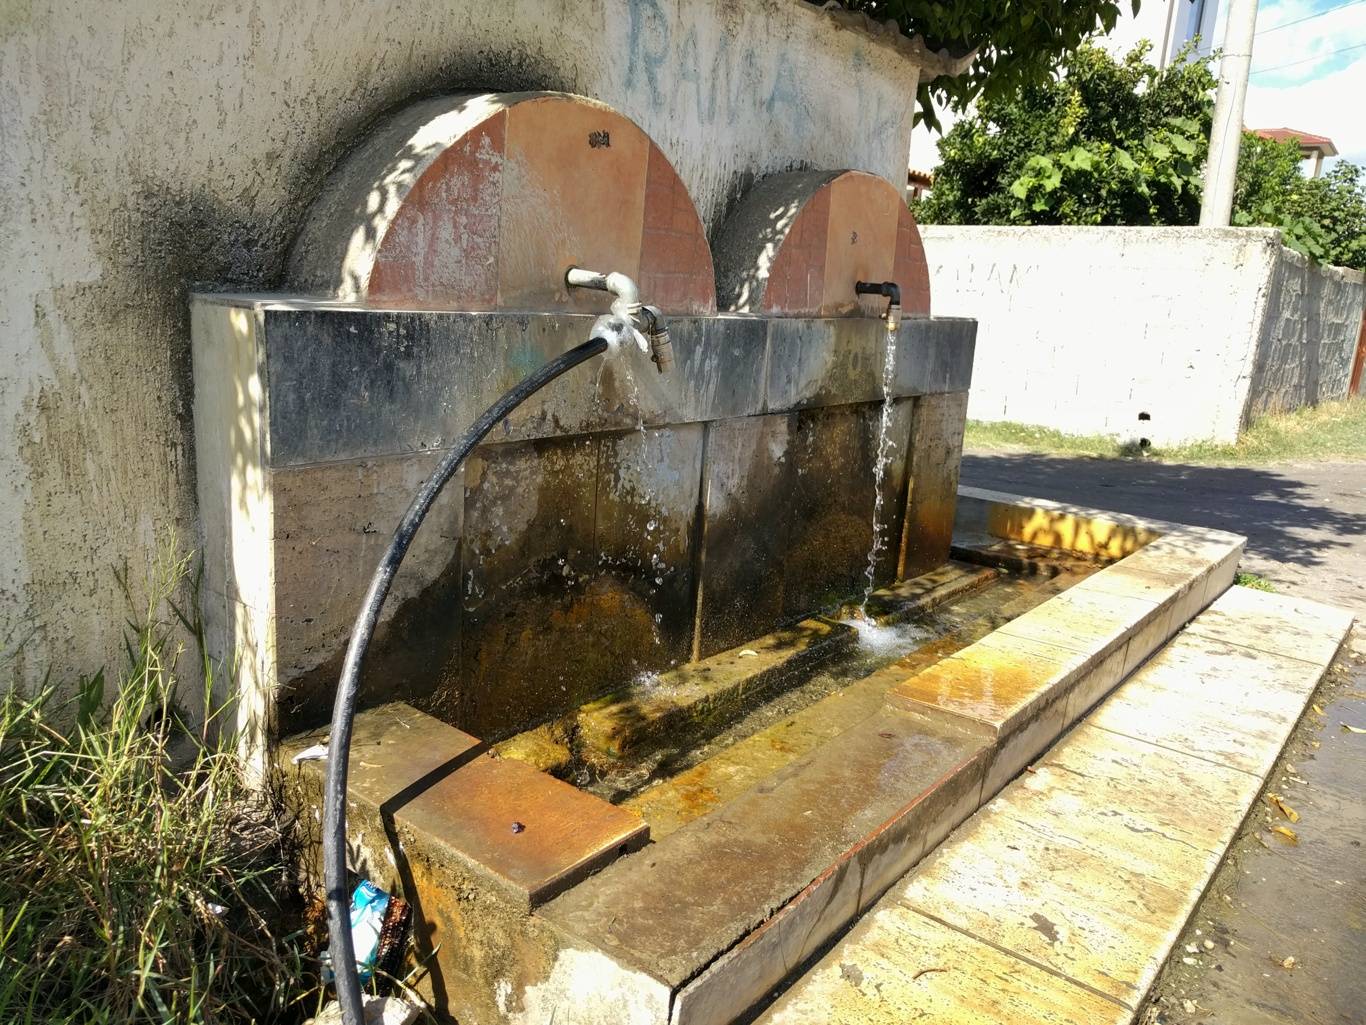 You can find wells like this everywhere on the Balkans. Very convenient for getting drinking water, too!